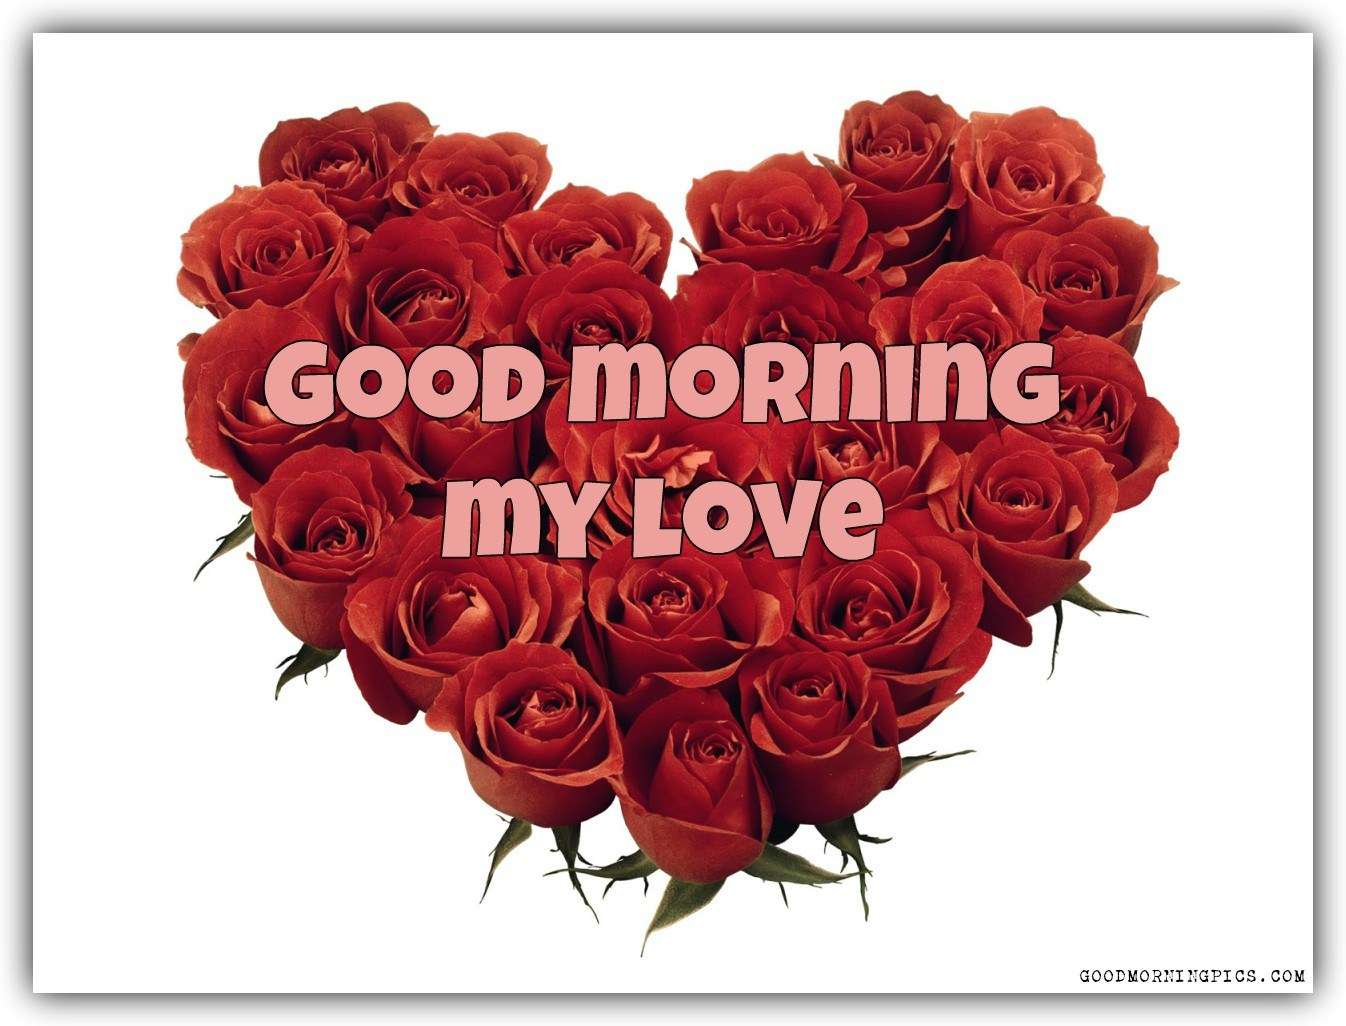 Good Morning Heart Rose Images